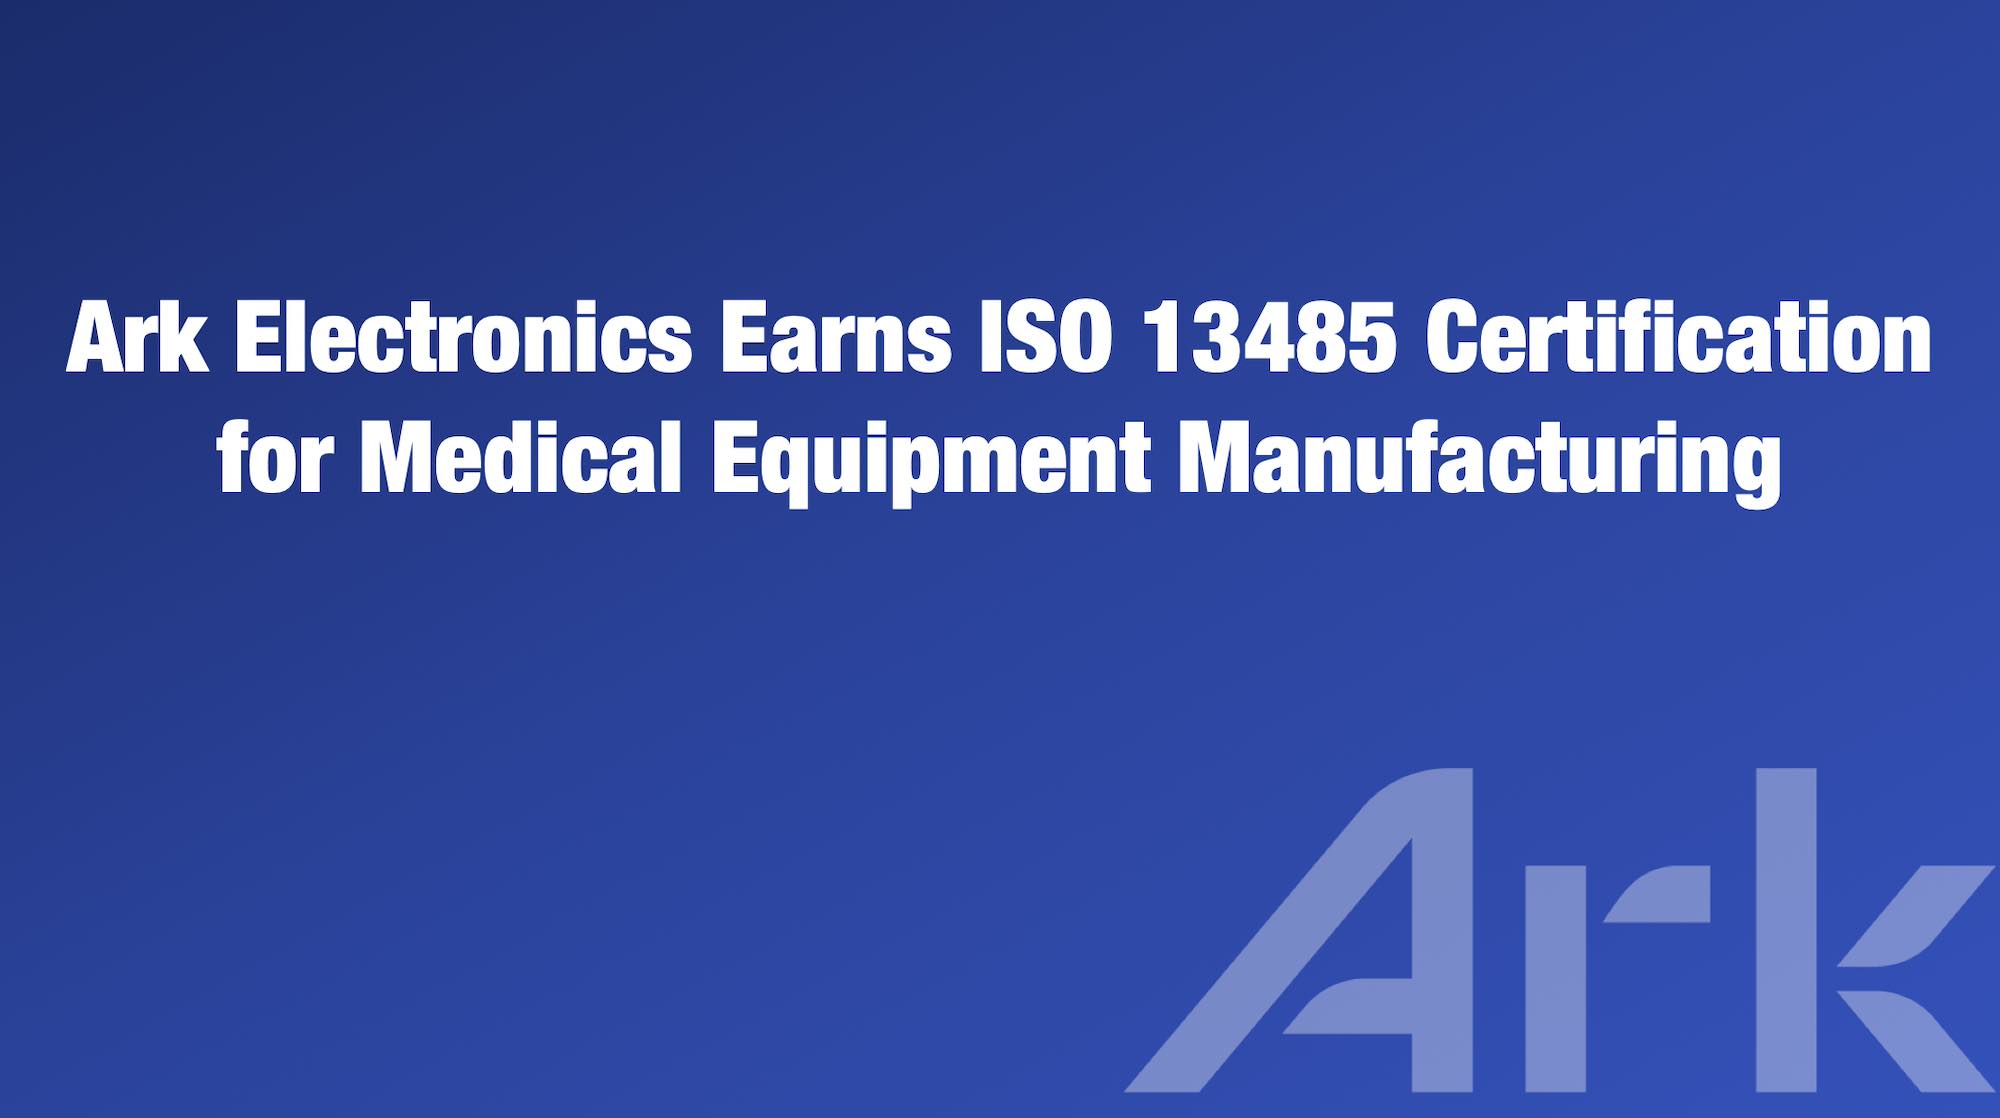 ISO 13485 Certification for Medical Equipment Manufacturing